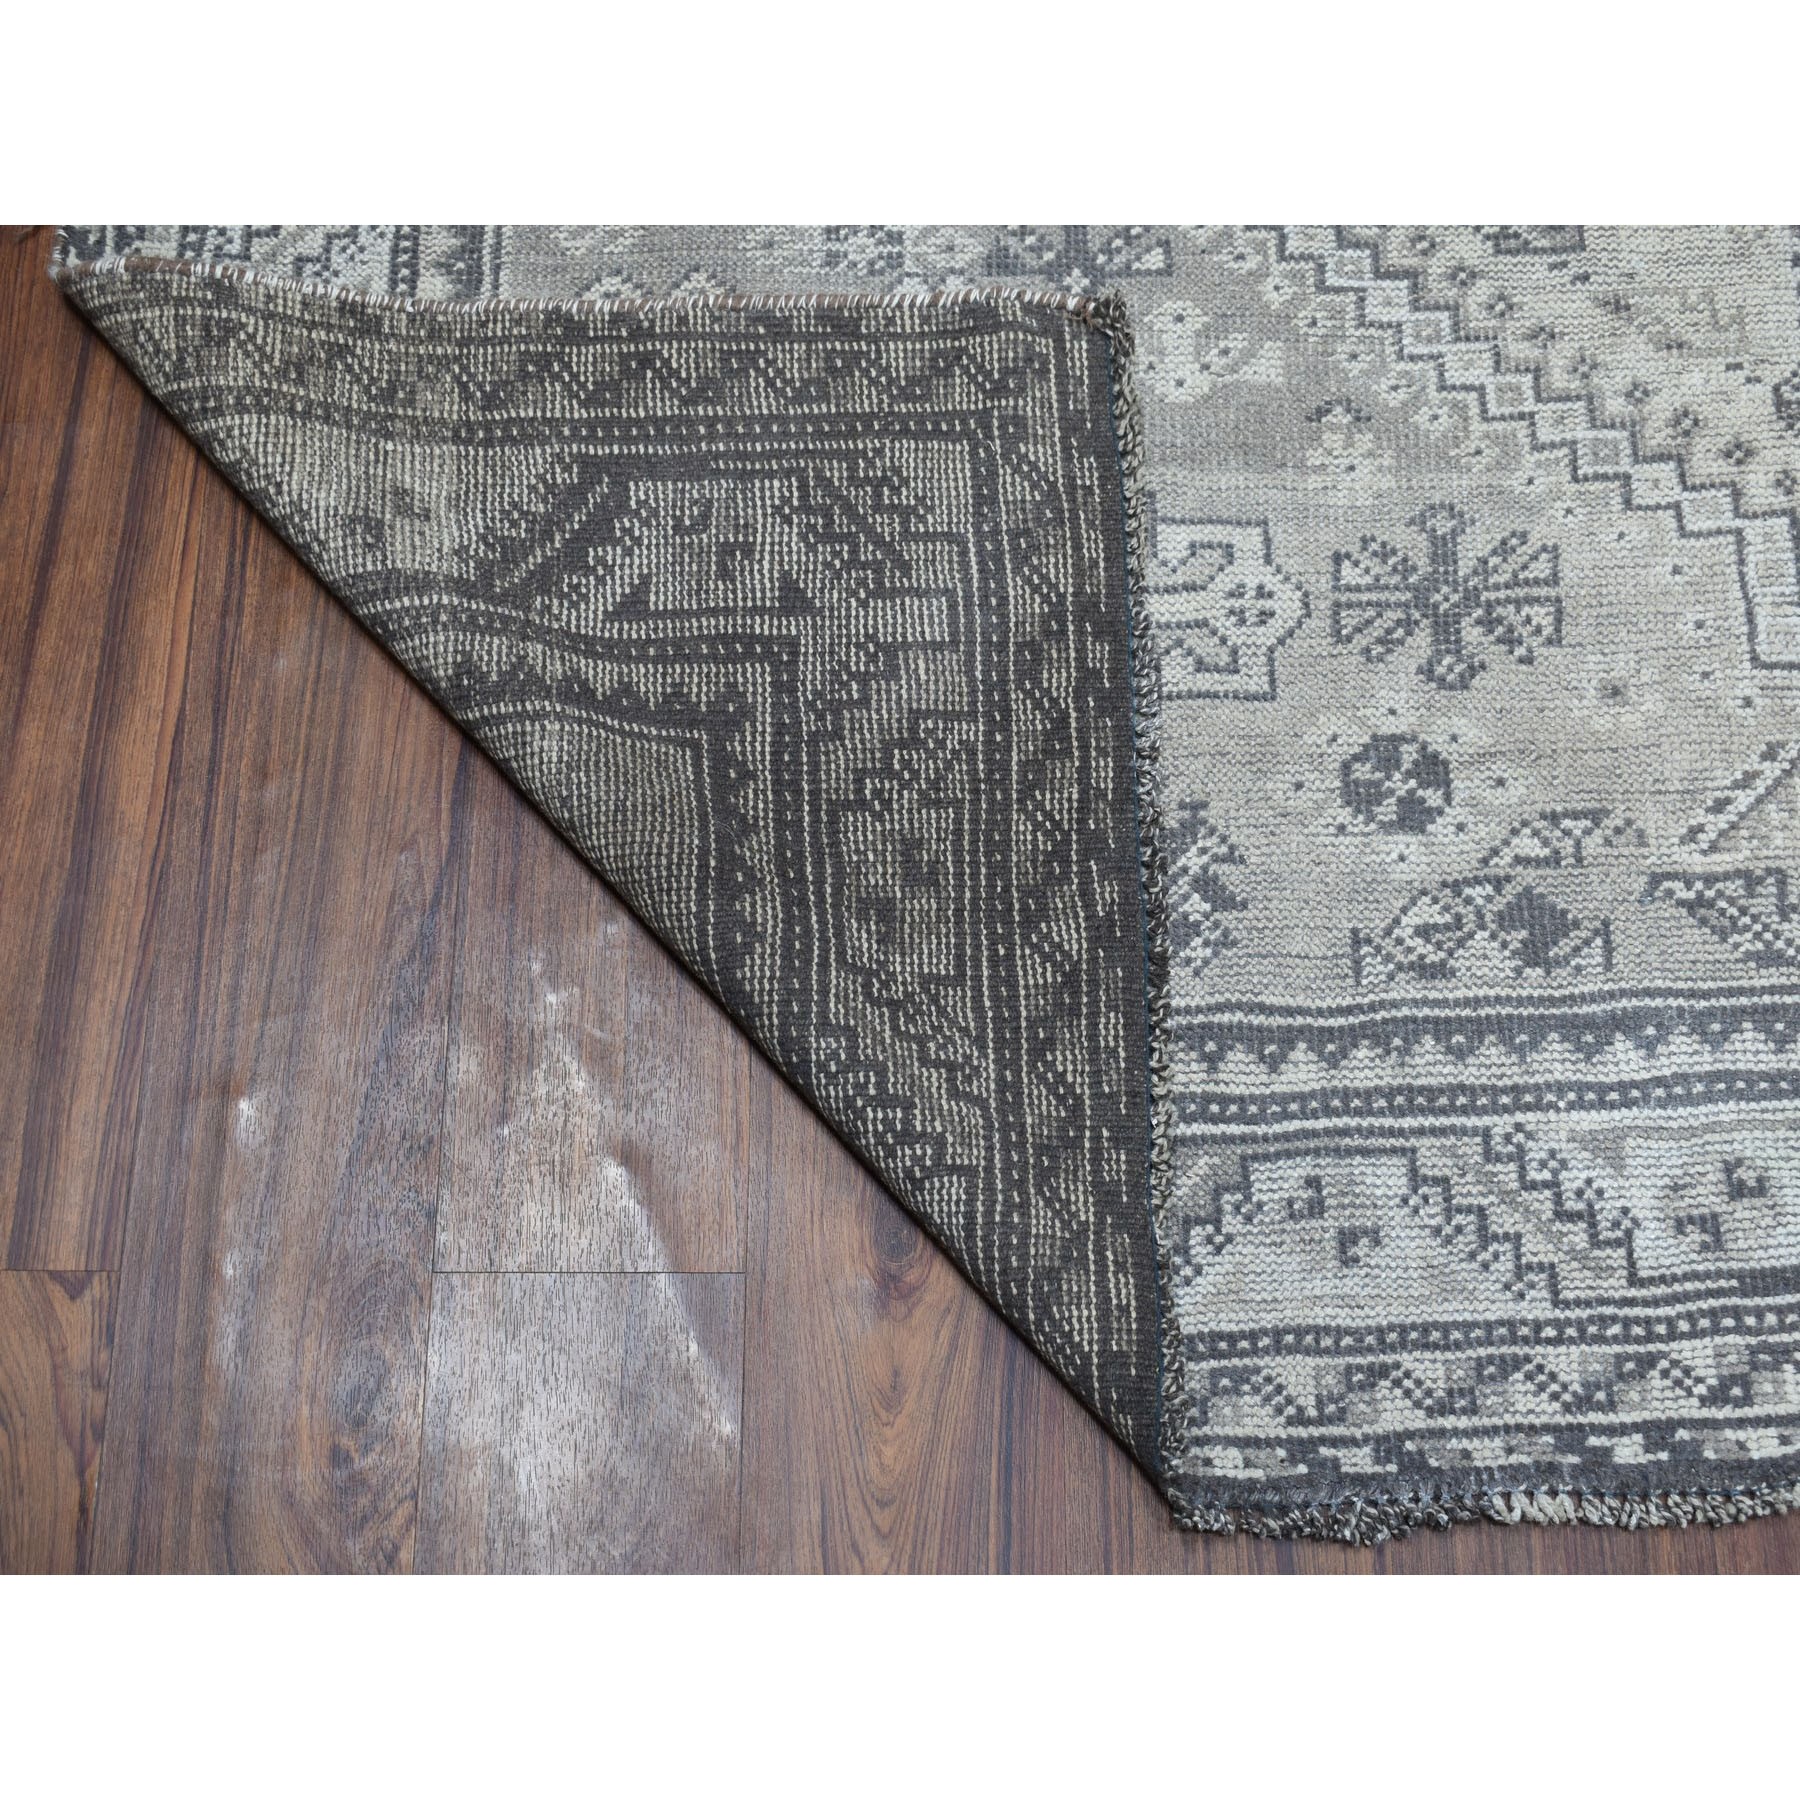 6-7 x9-4  Vintage And Worn Down Distressed Colors Persian Qashqai Hand Knotted Bohemian Rug 